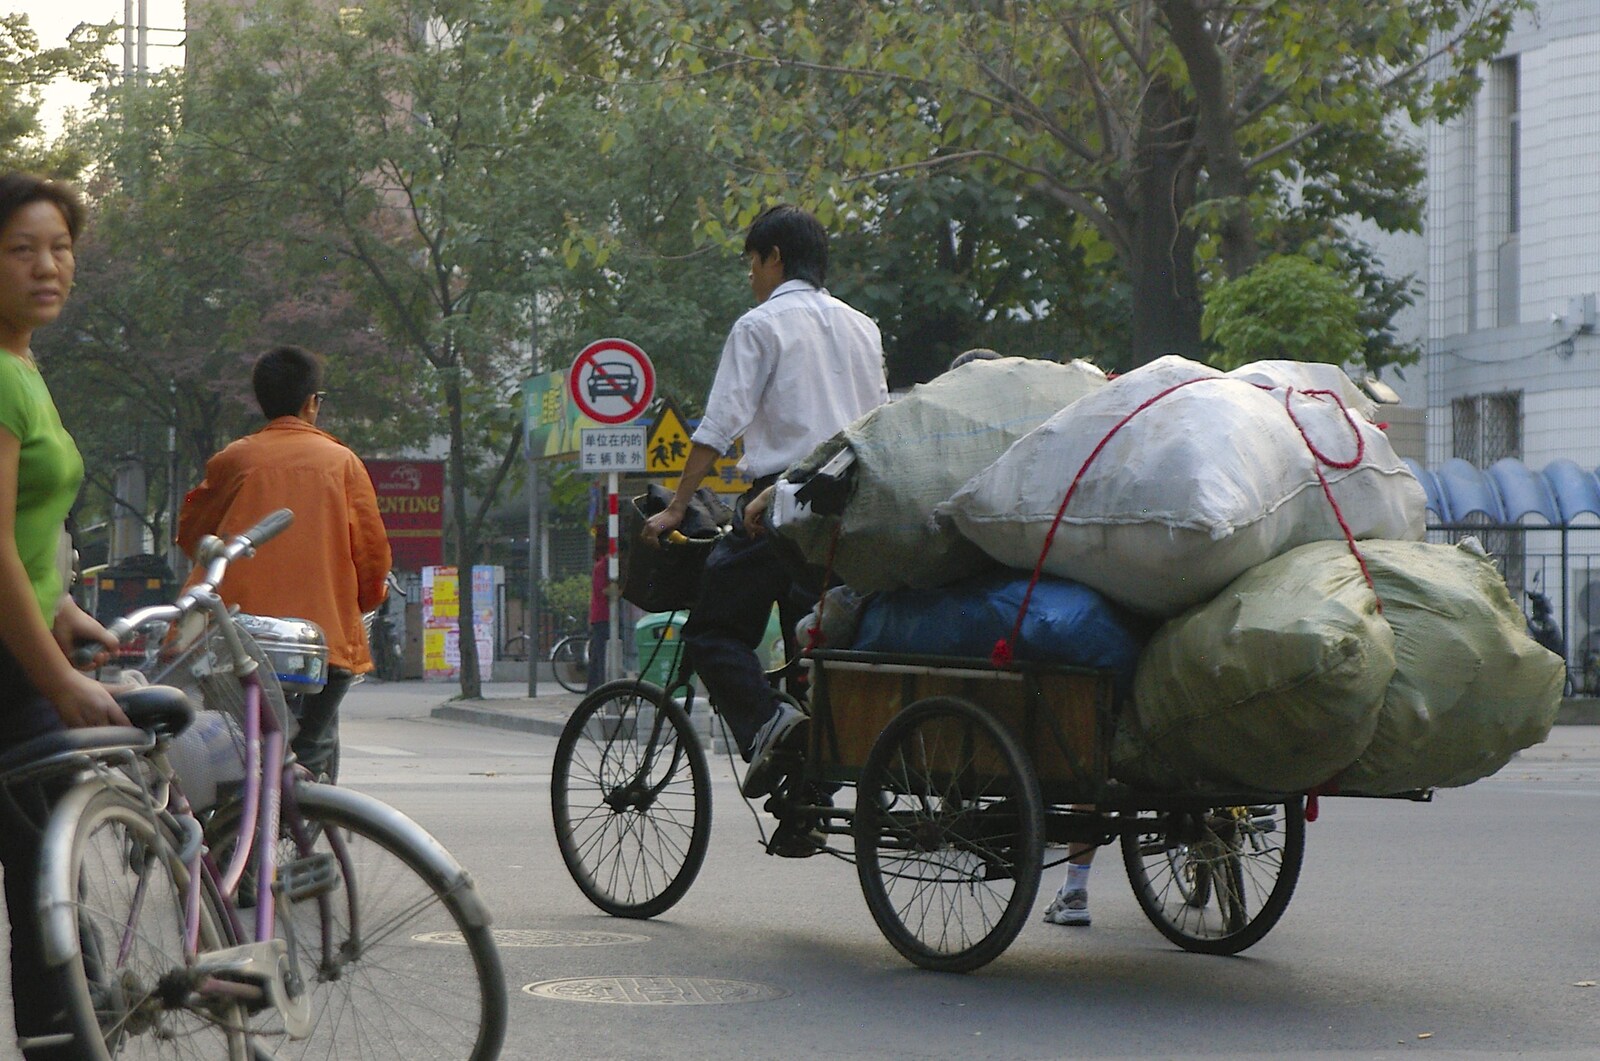 Cycles tow rather large amounts of stuff from A Few Days in Nanjing, Jiangsu Province, China - 7th October 2006